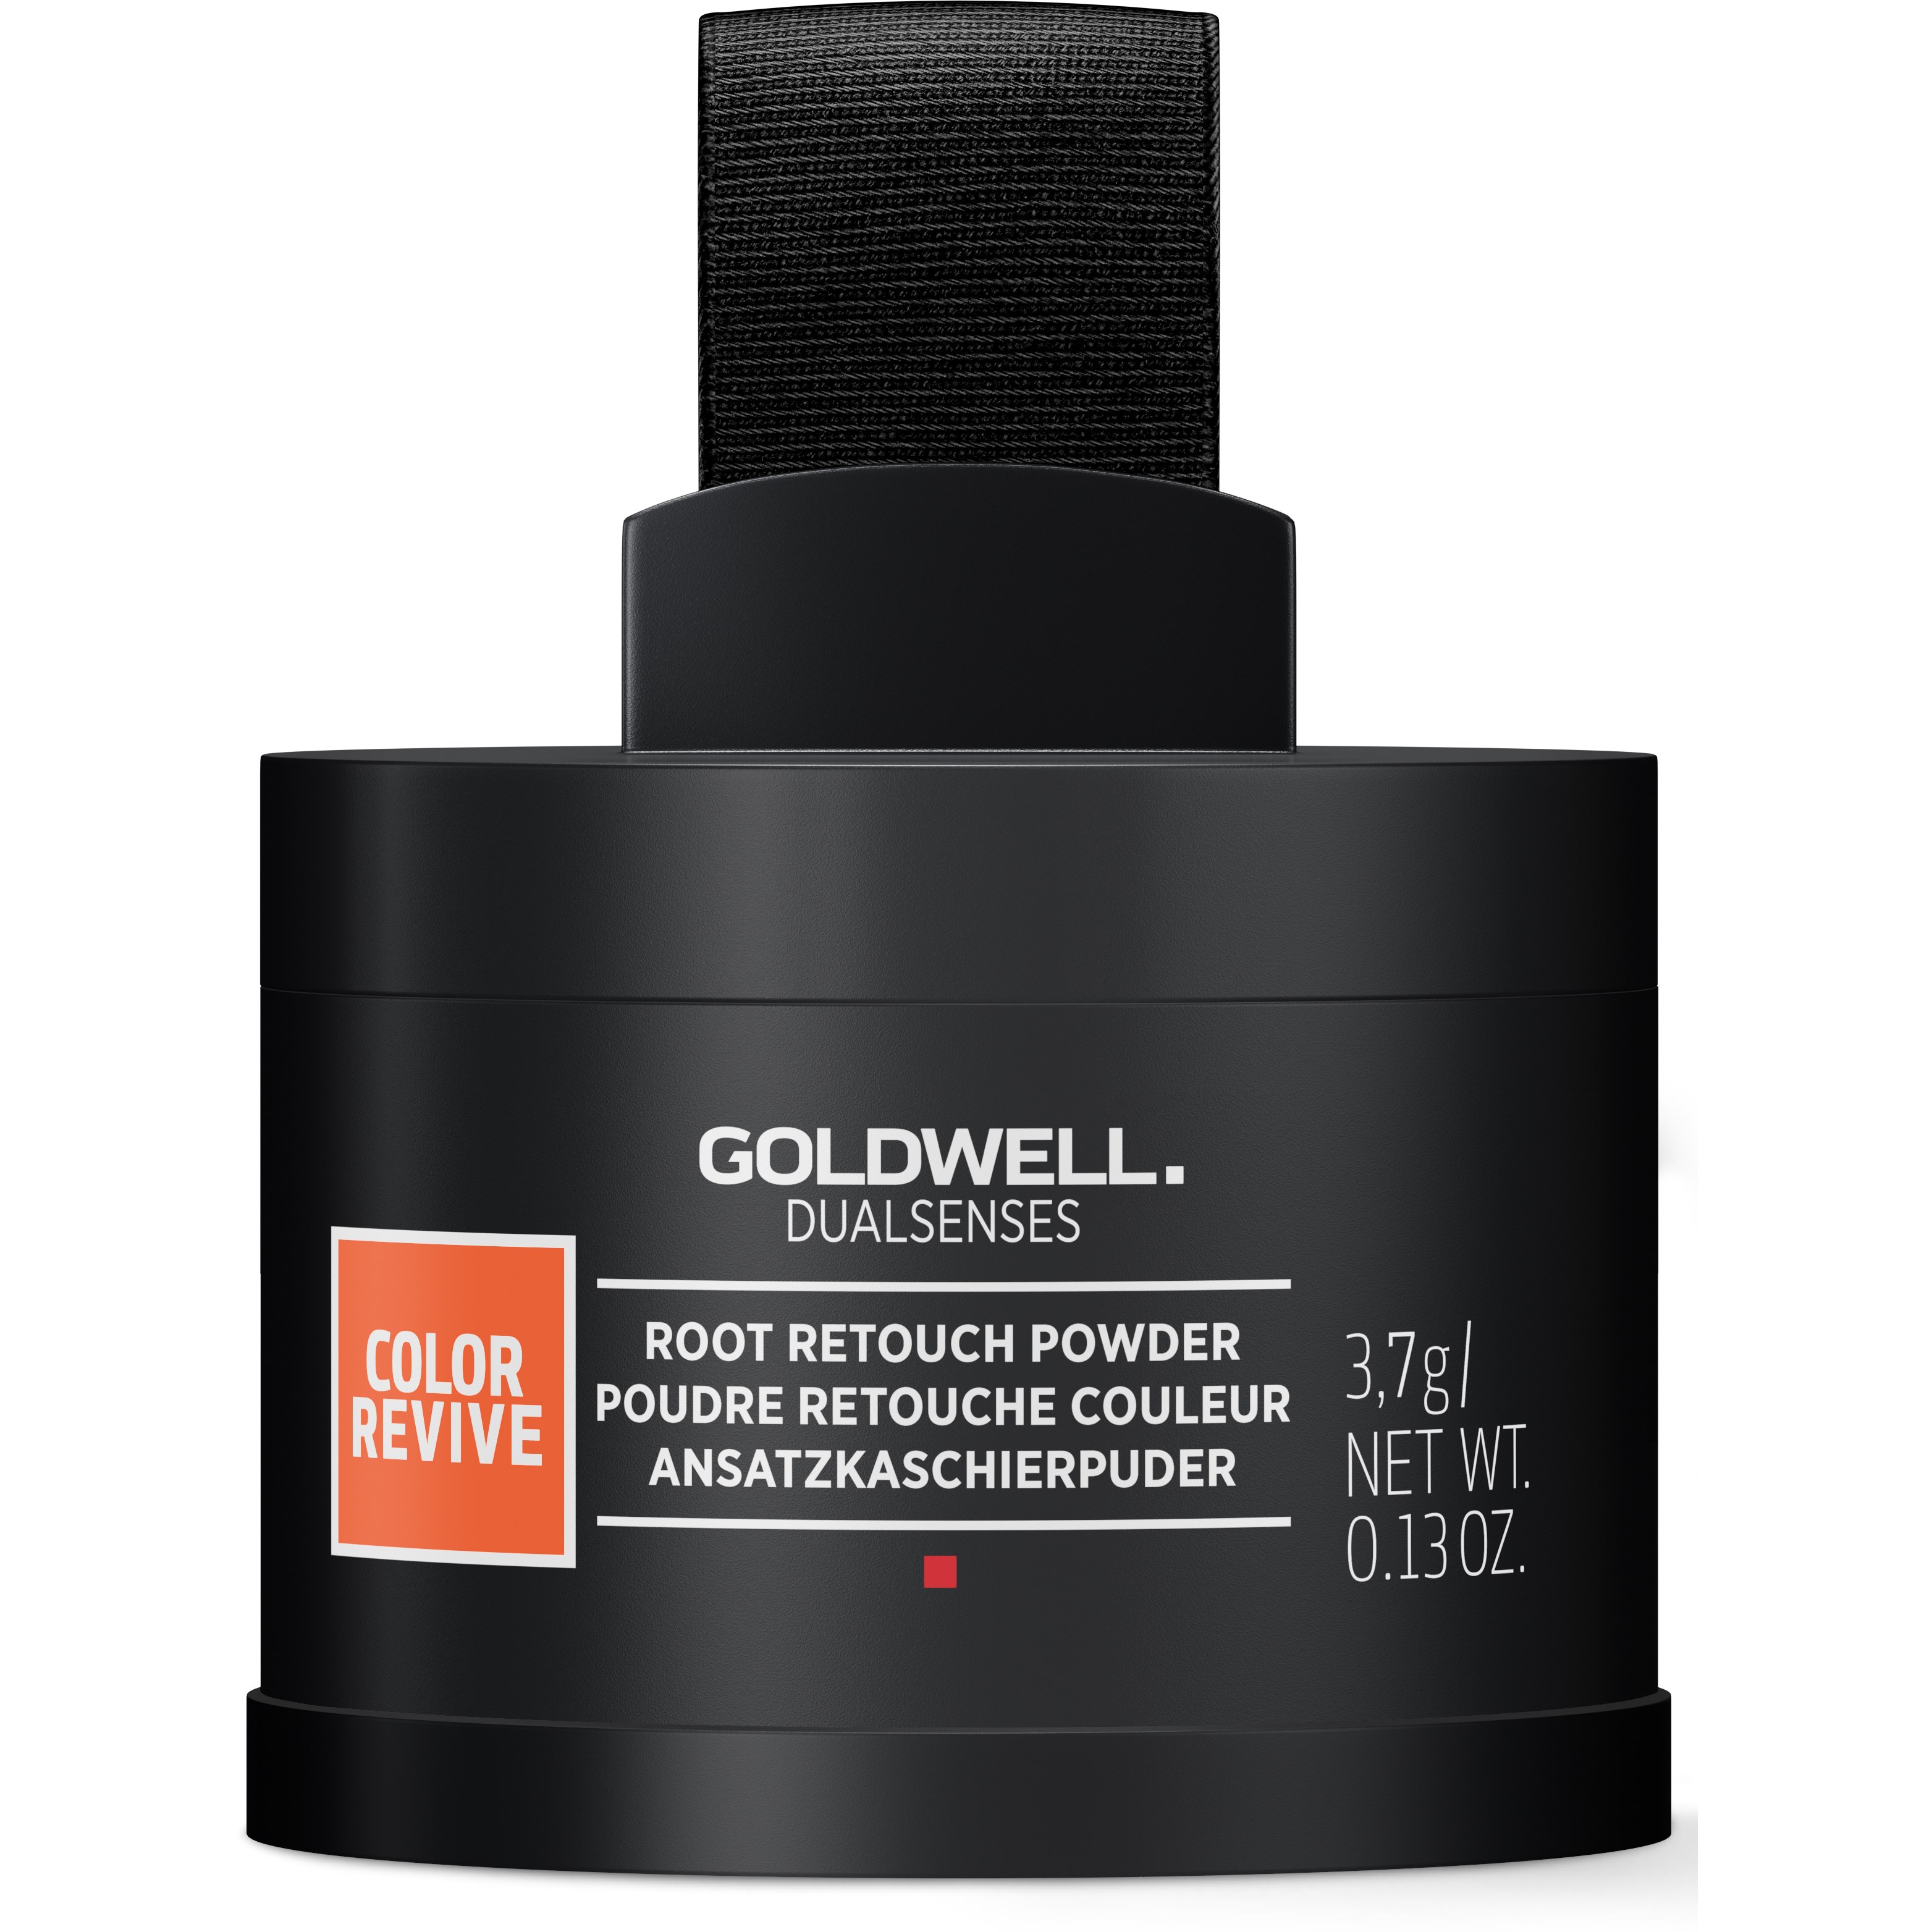 Läs mer om Goldwell Dualsenses Color Revive Root Retouch Powder Copper Red